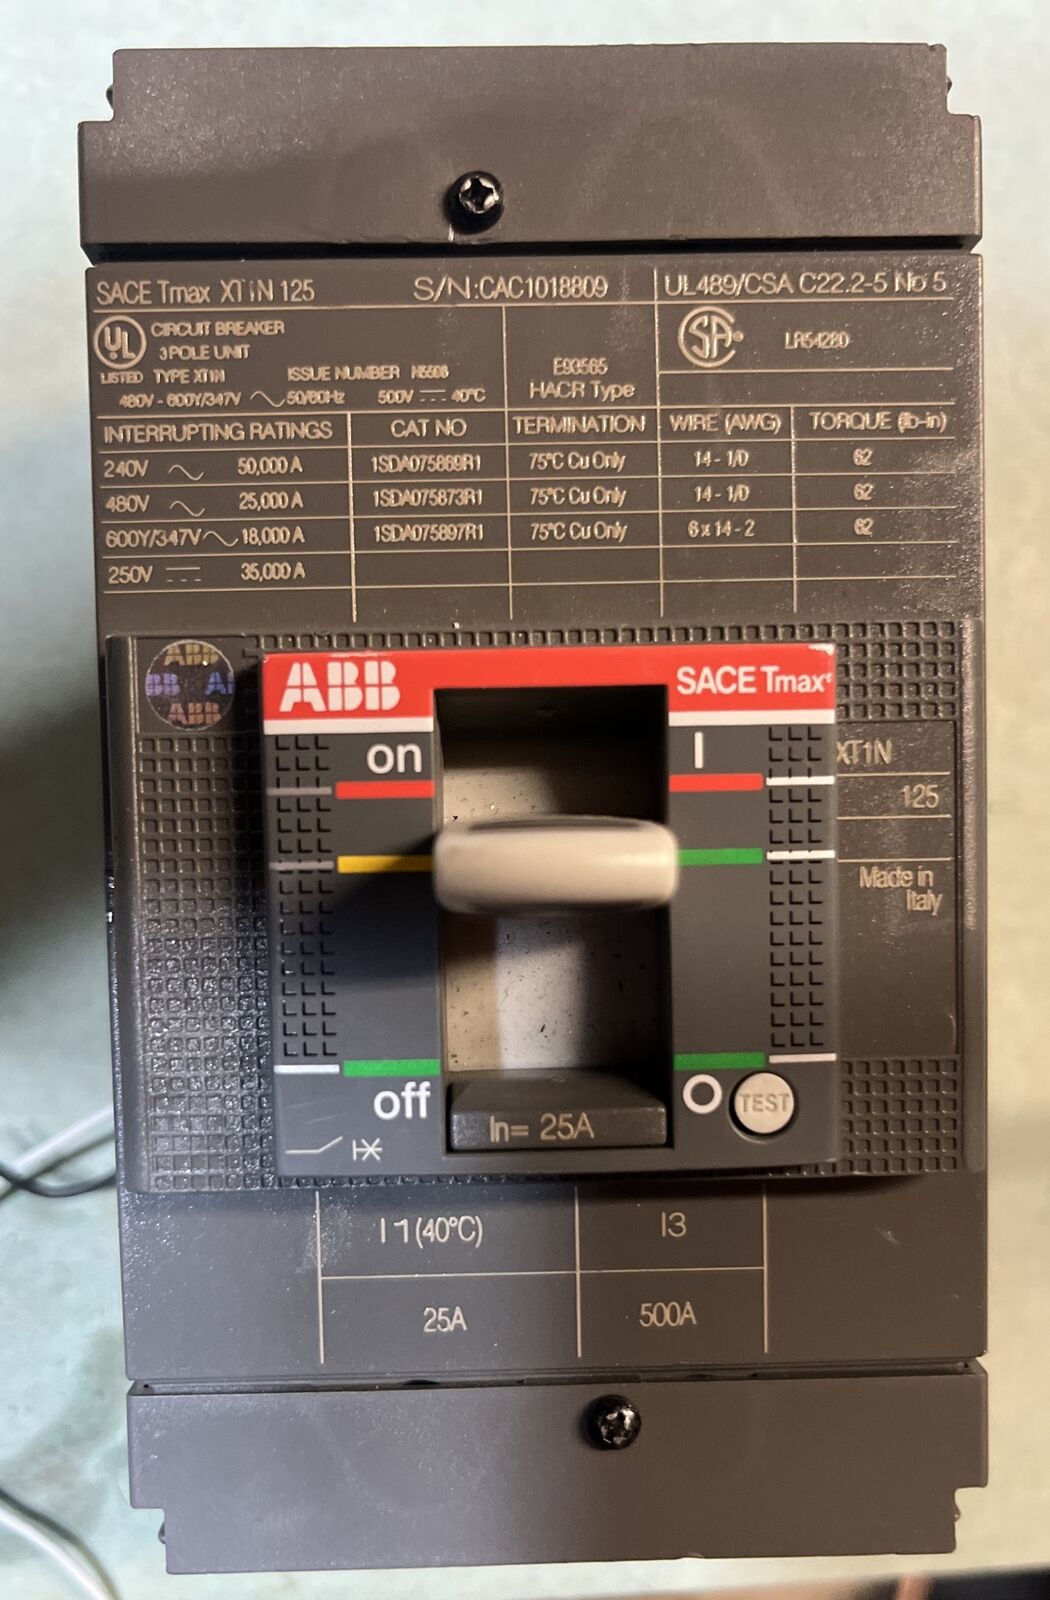 New ABB SACE TMAX XT1N 125 3P 25A-500A HACR Circuit Breaker Cleaned And Tested